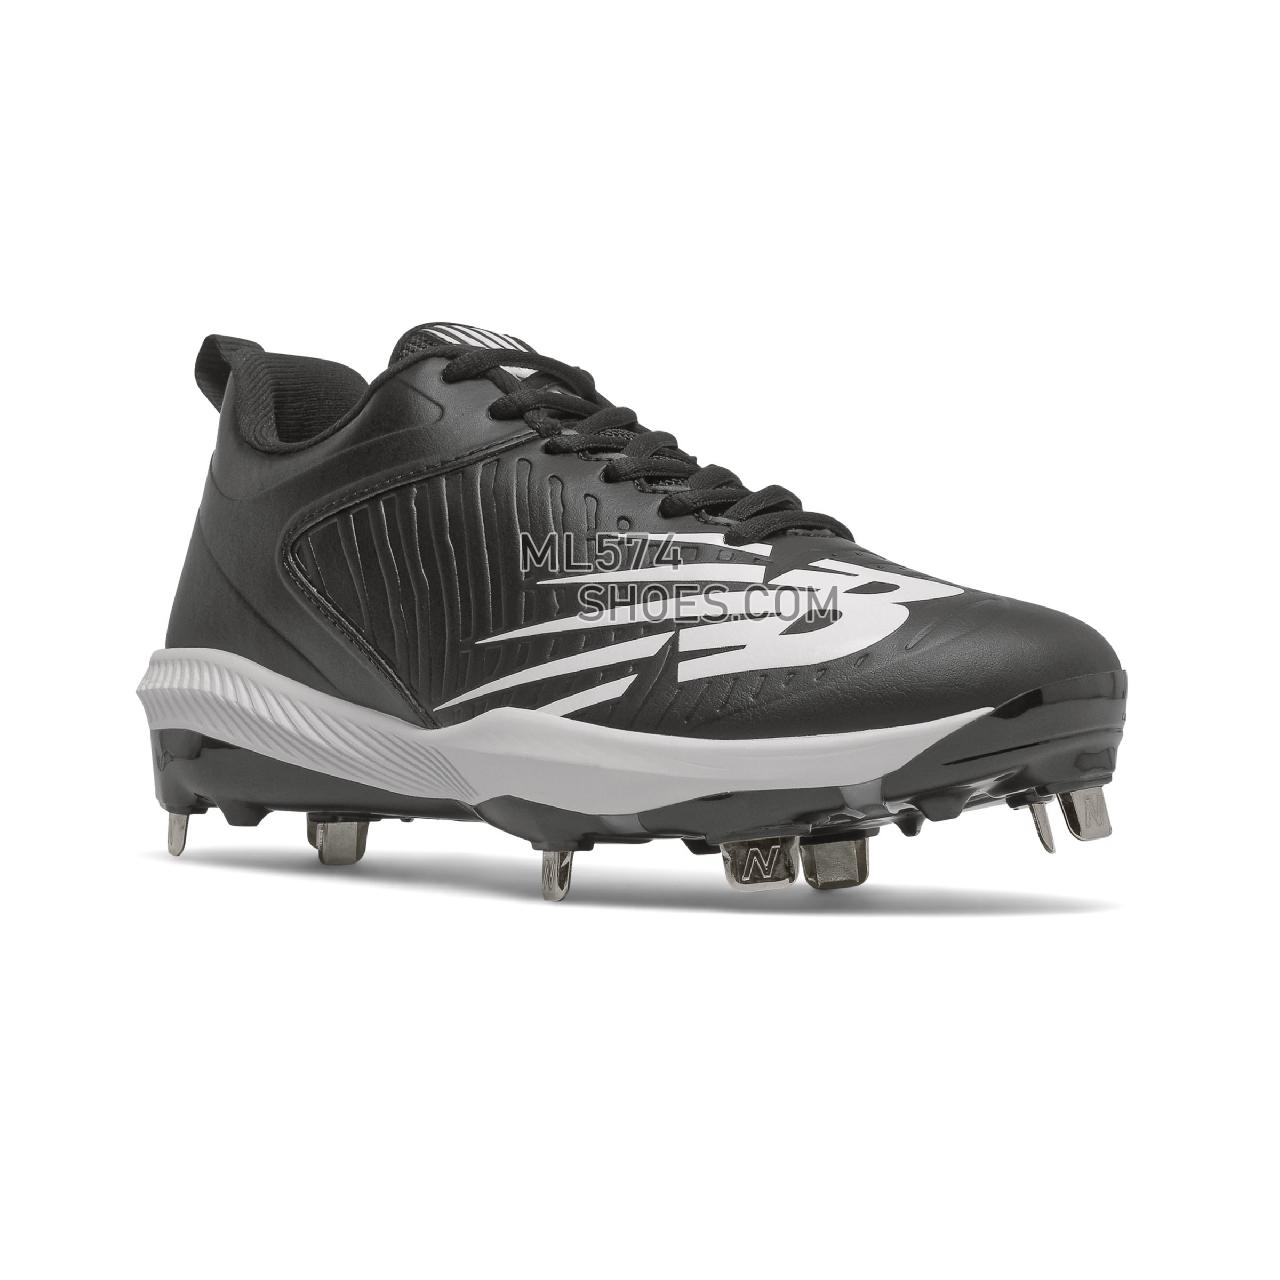 New Balance FuelCell SMFUSEv3 - Women's Softball - Black with White - SMFUSEK3